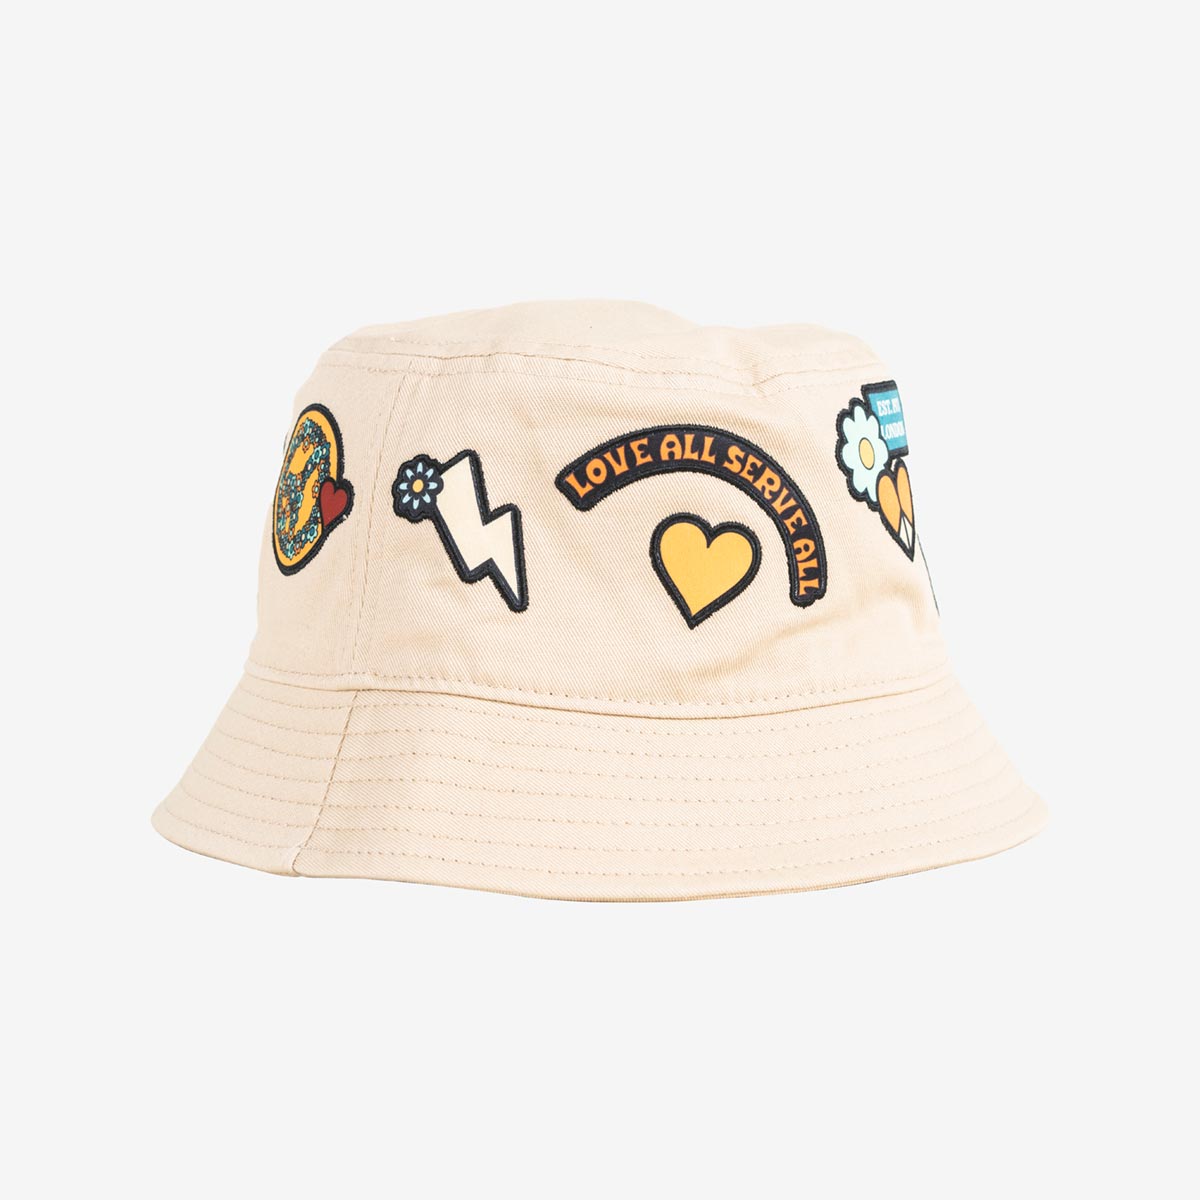 Hard Rock Music Festival Bucket Hat with Patches in Khaki image number 5